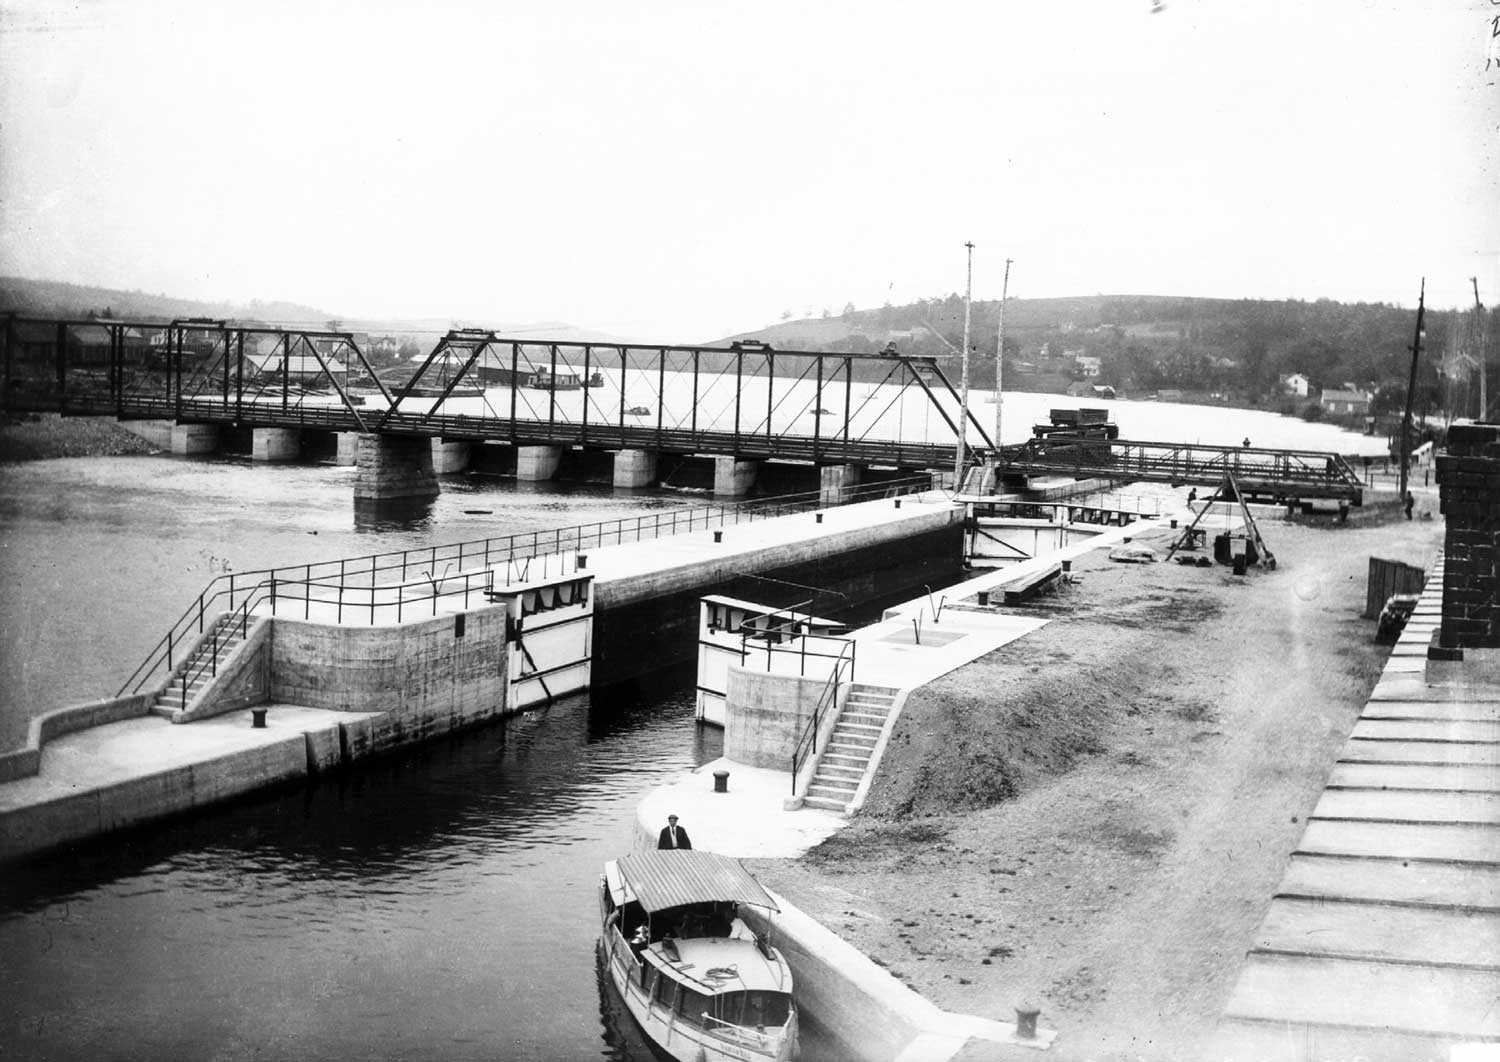 Lock 18 at Hastings at the turn of the century (Photo courtesy of the Trent-Severn Waterway Archives)